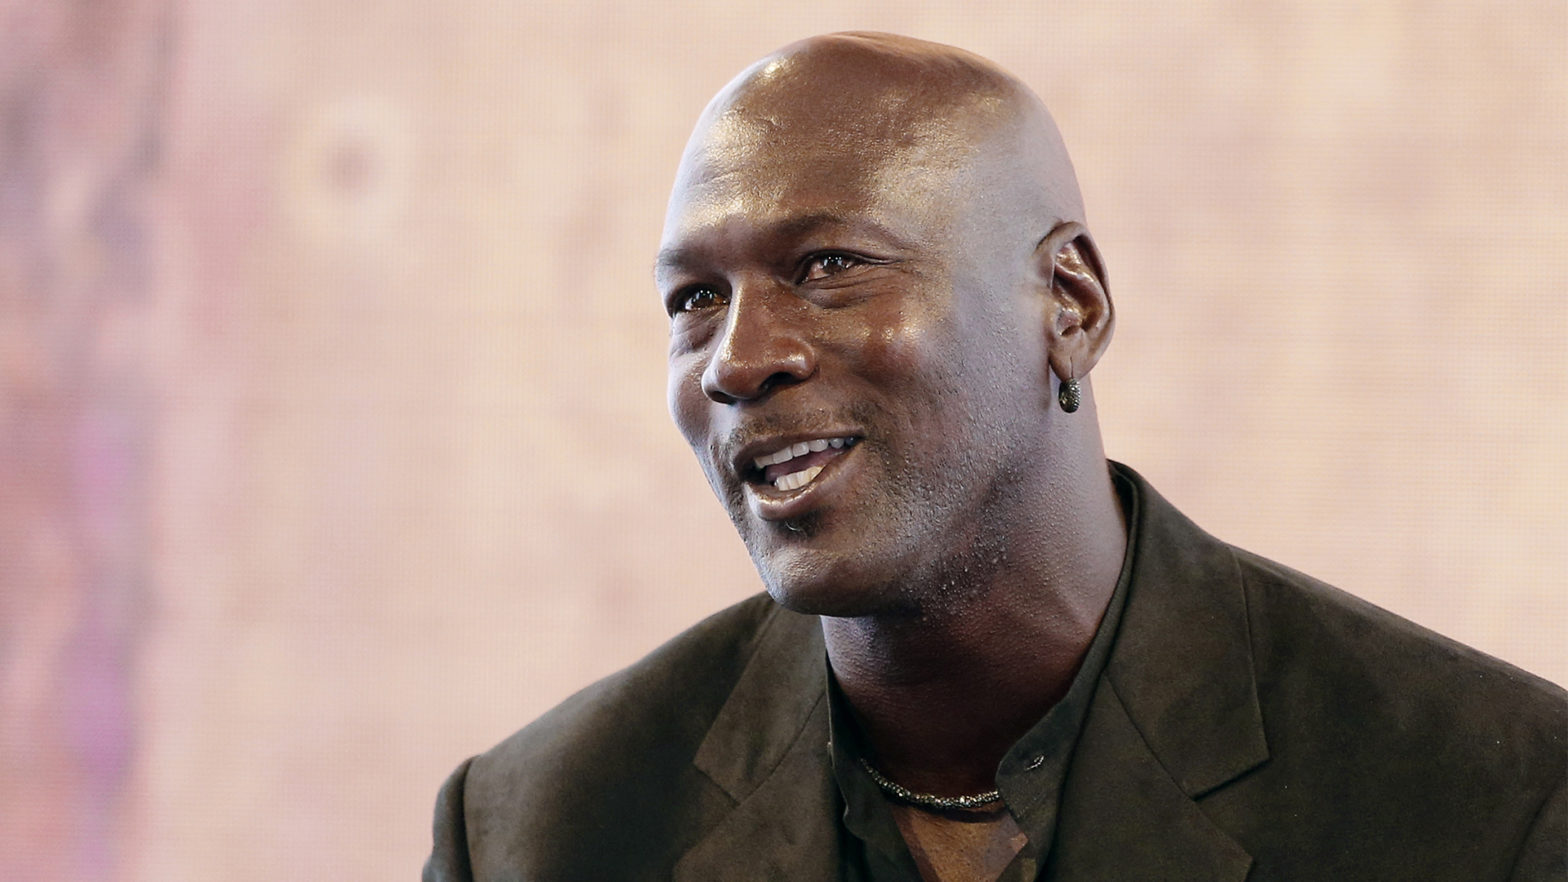 Michael Jordan Almost Turned His Nike Deal Down Before His Mom Intervened, 'She Made Me Get On That Plane'